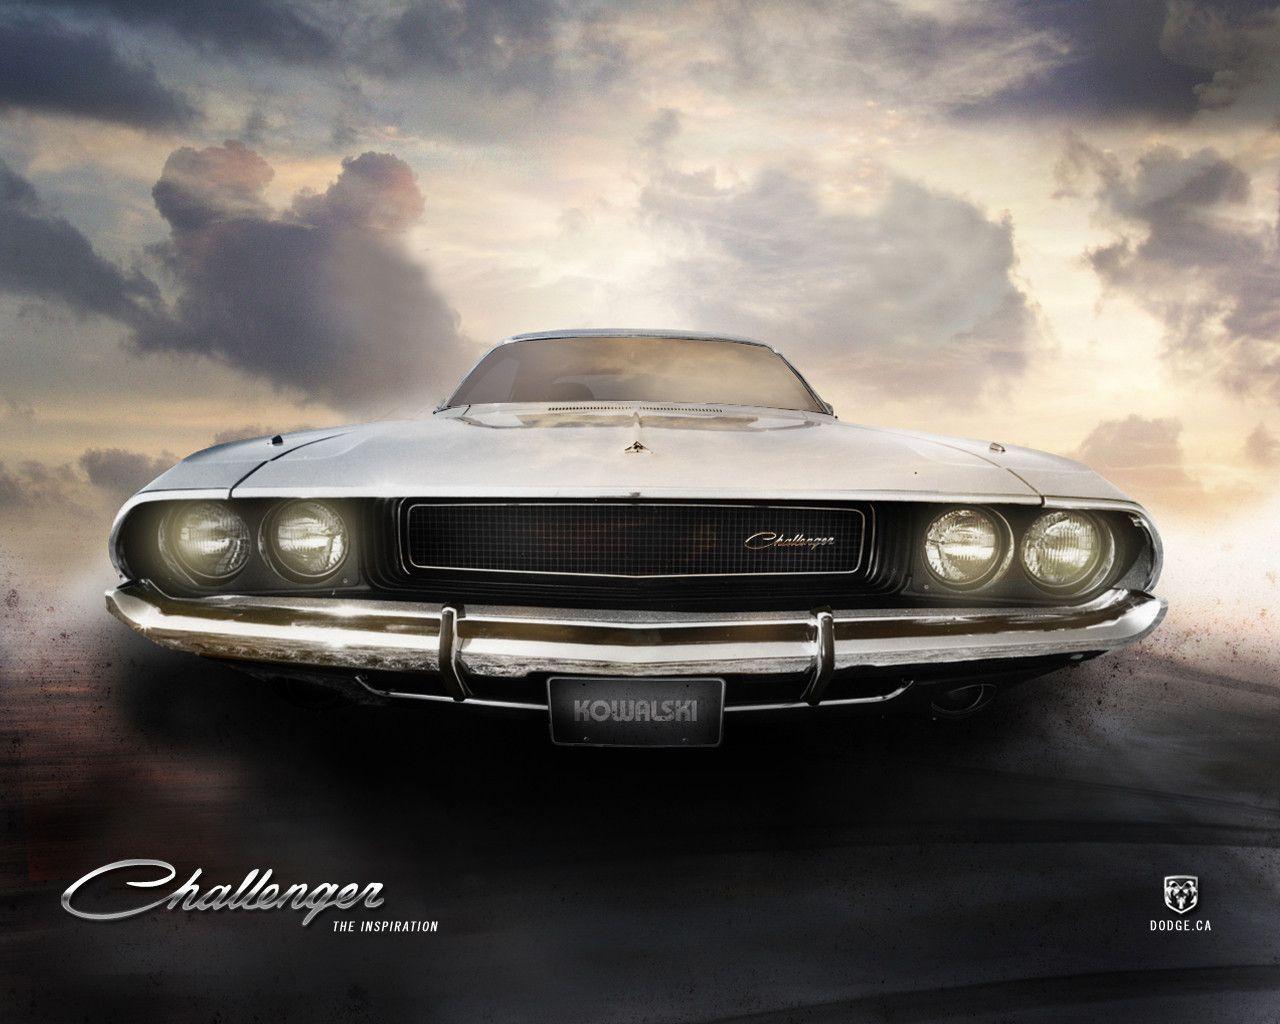 New Dodge Charger 1970 9307 Vehicles HD Wallpaper Widescreen